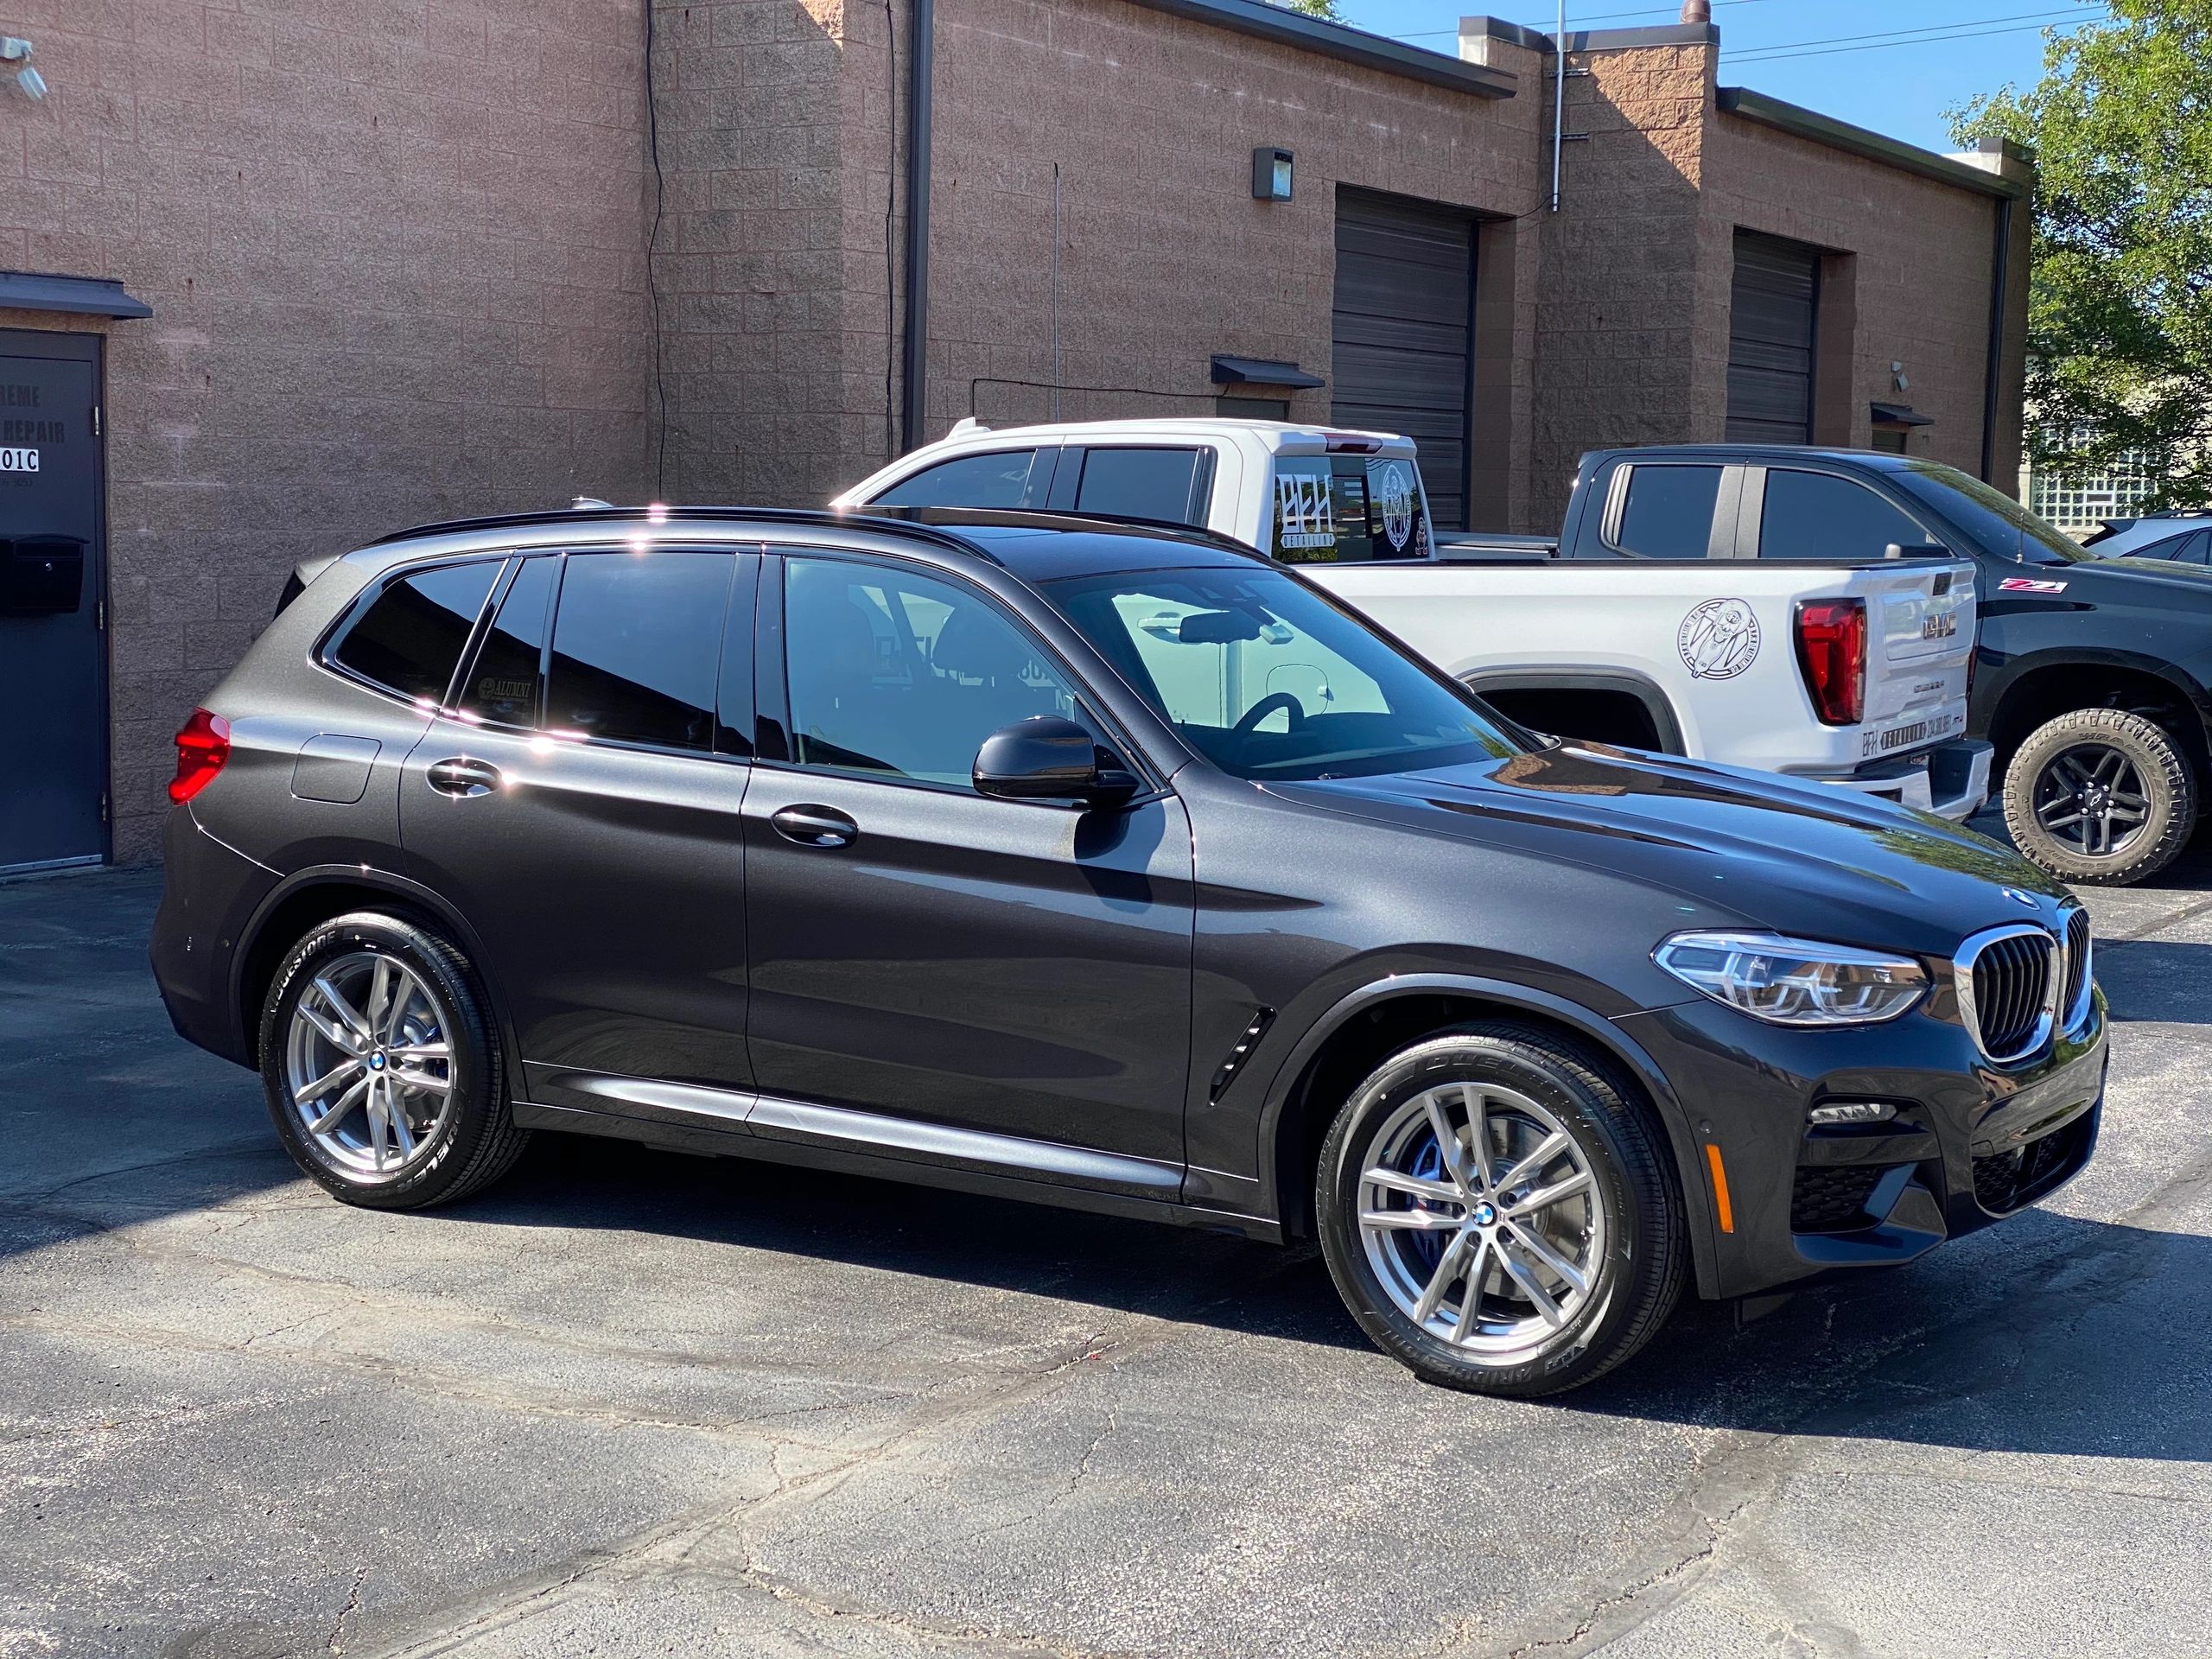 BMW X3 Corrected and Ceramic Coated